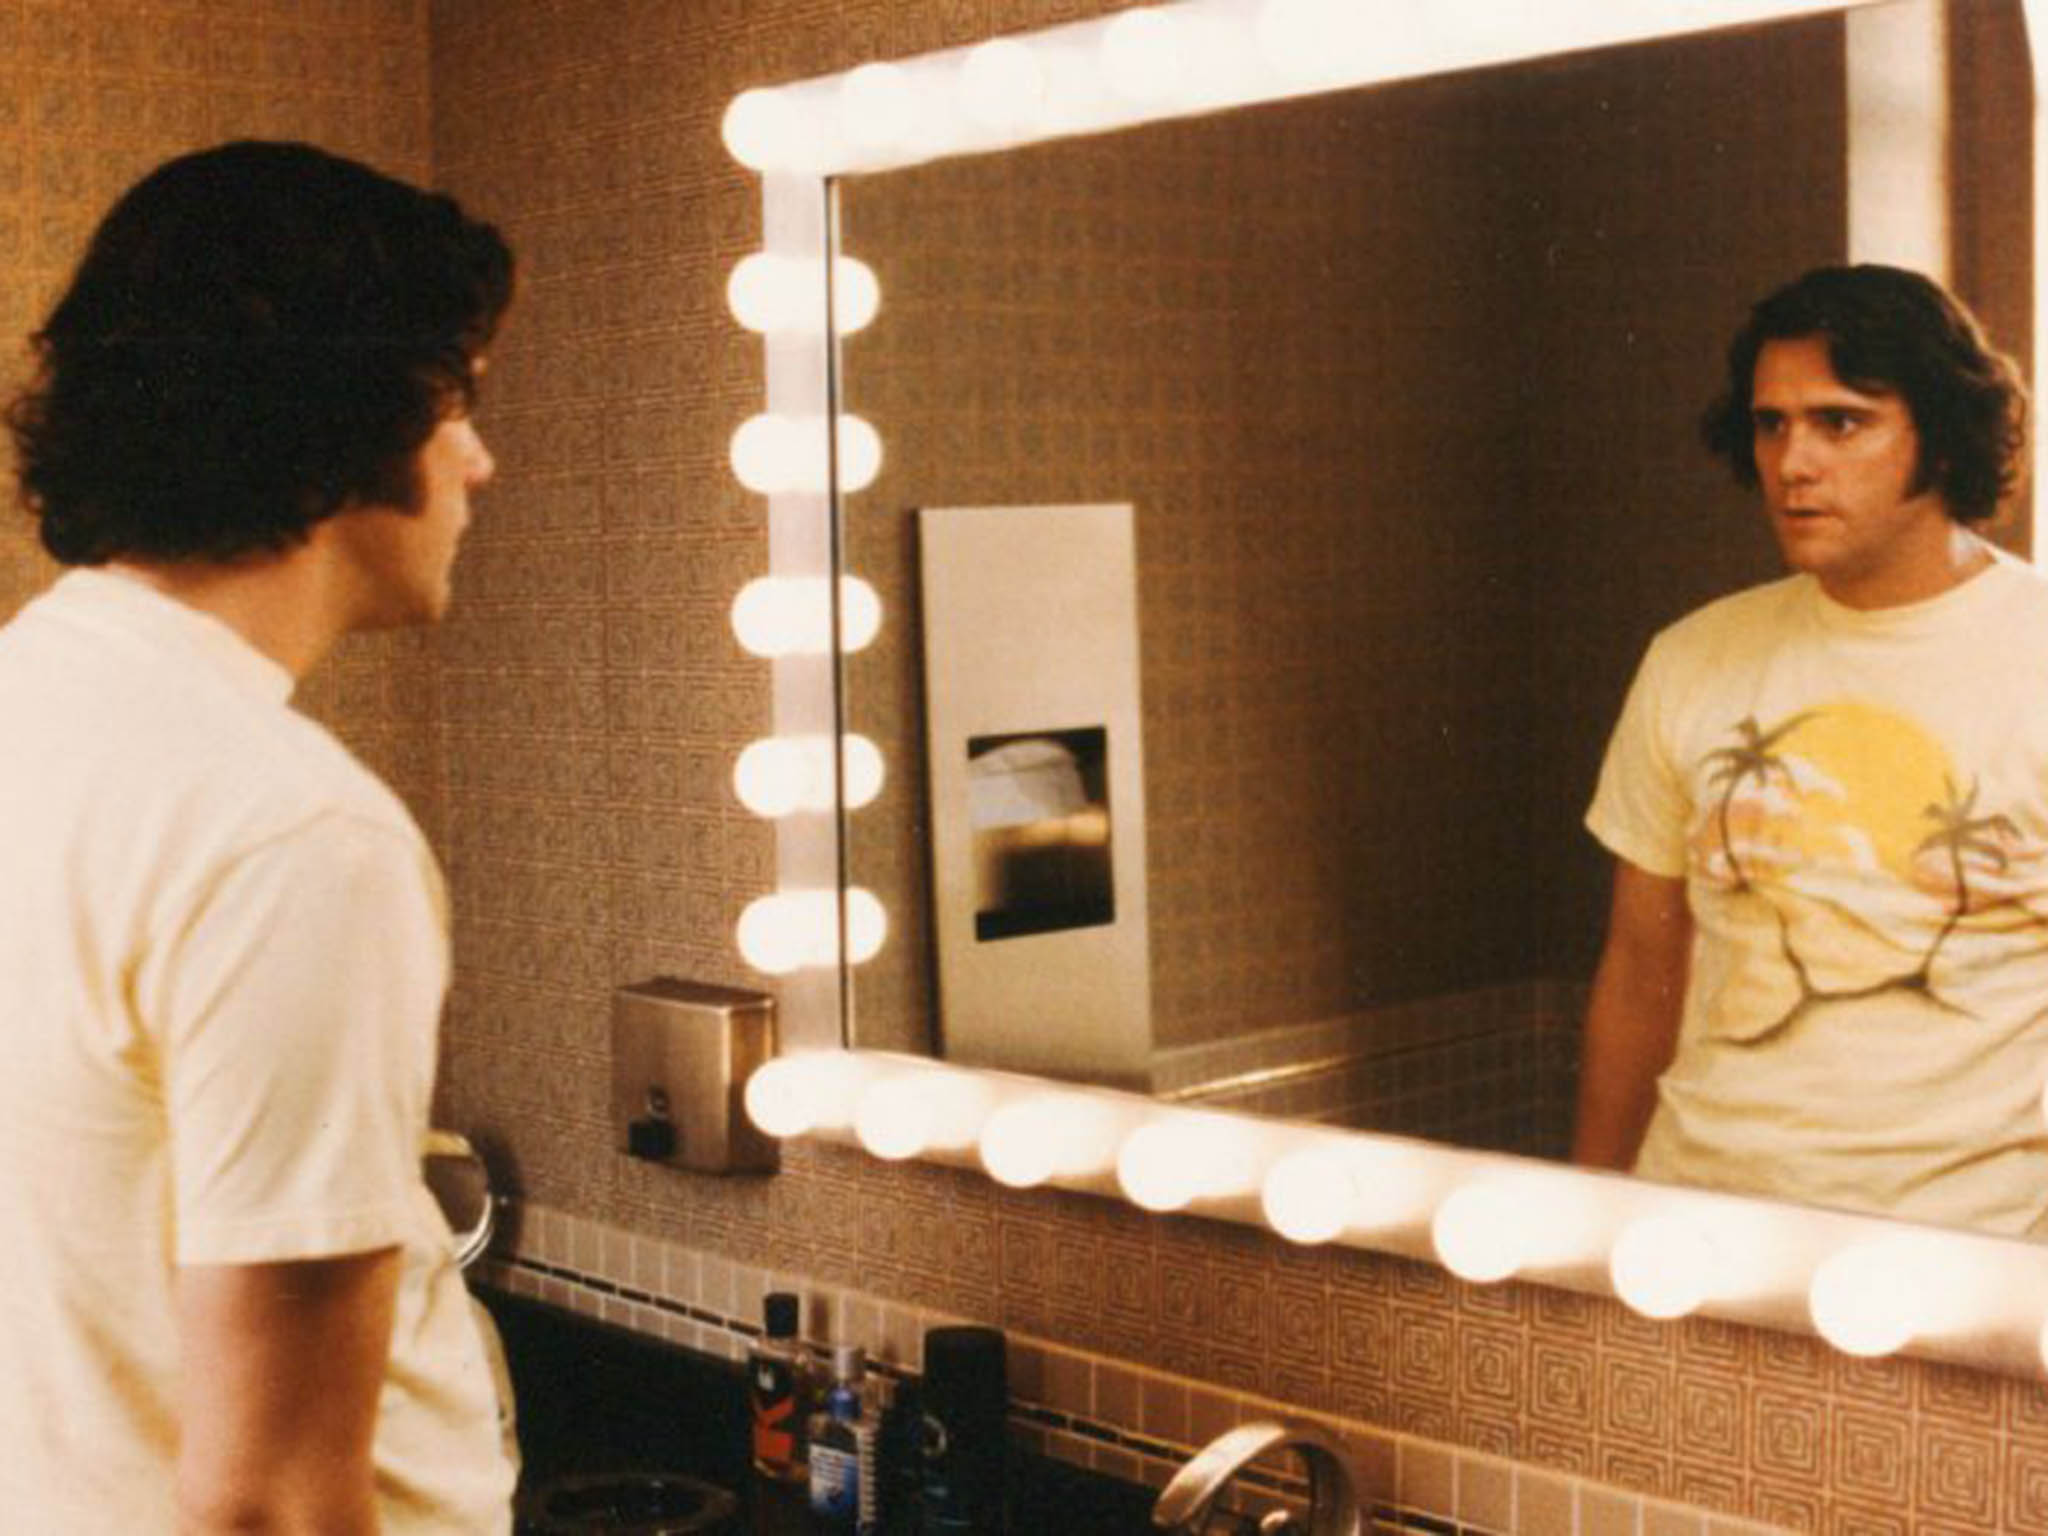 Jim Carrey’s erratic transformation into Andy Kaufman is the subject of ‘Jim and Andy: The Great Beyond’